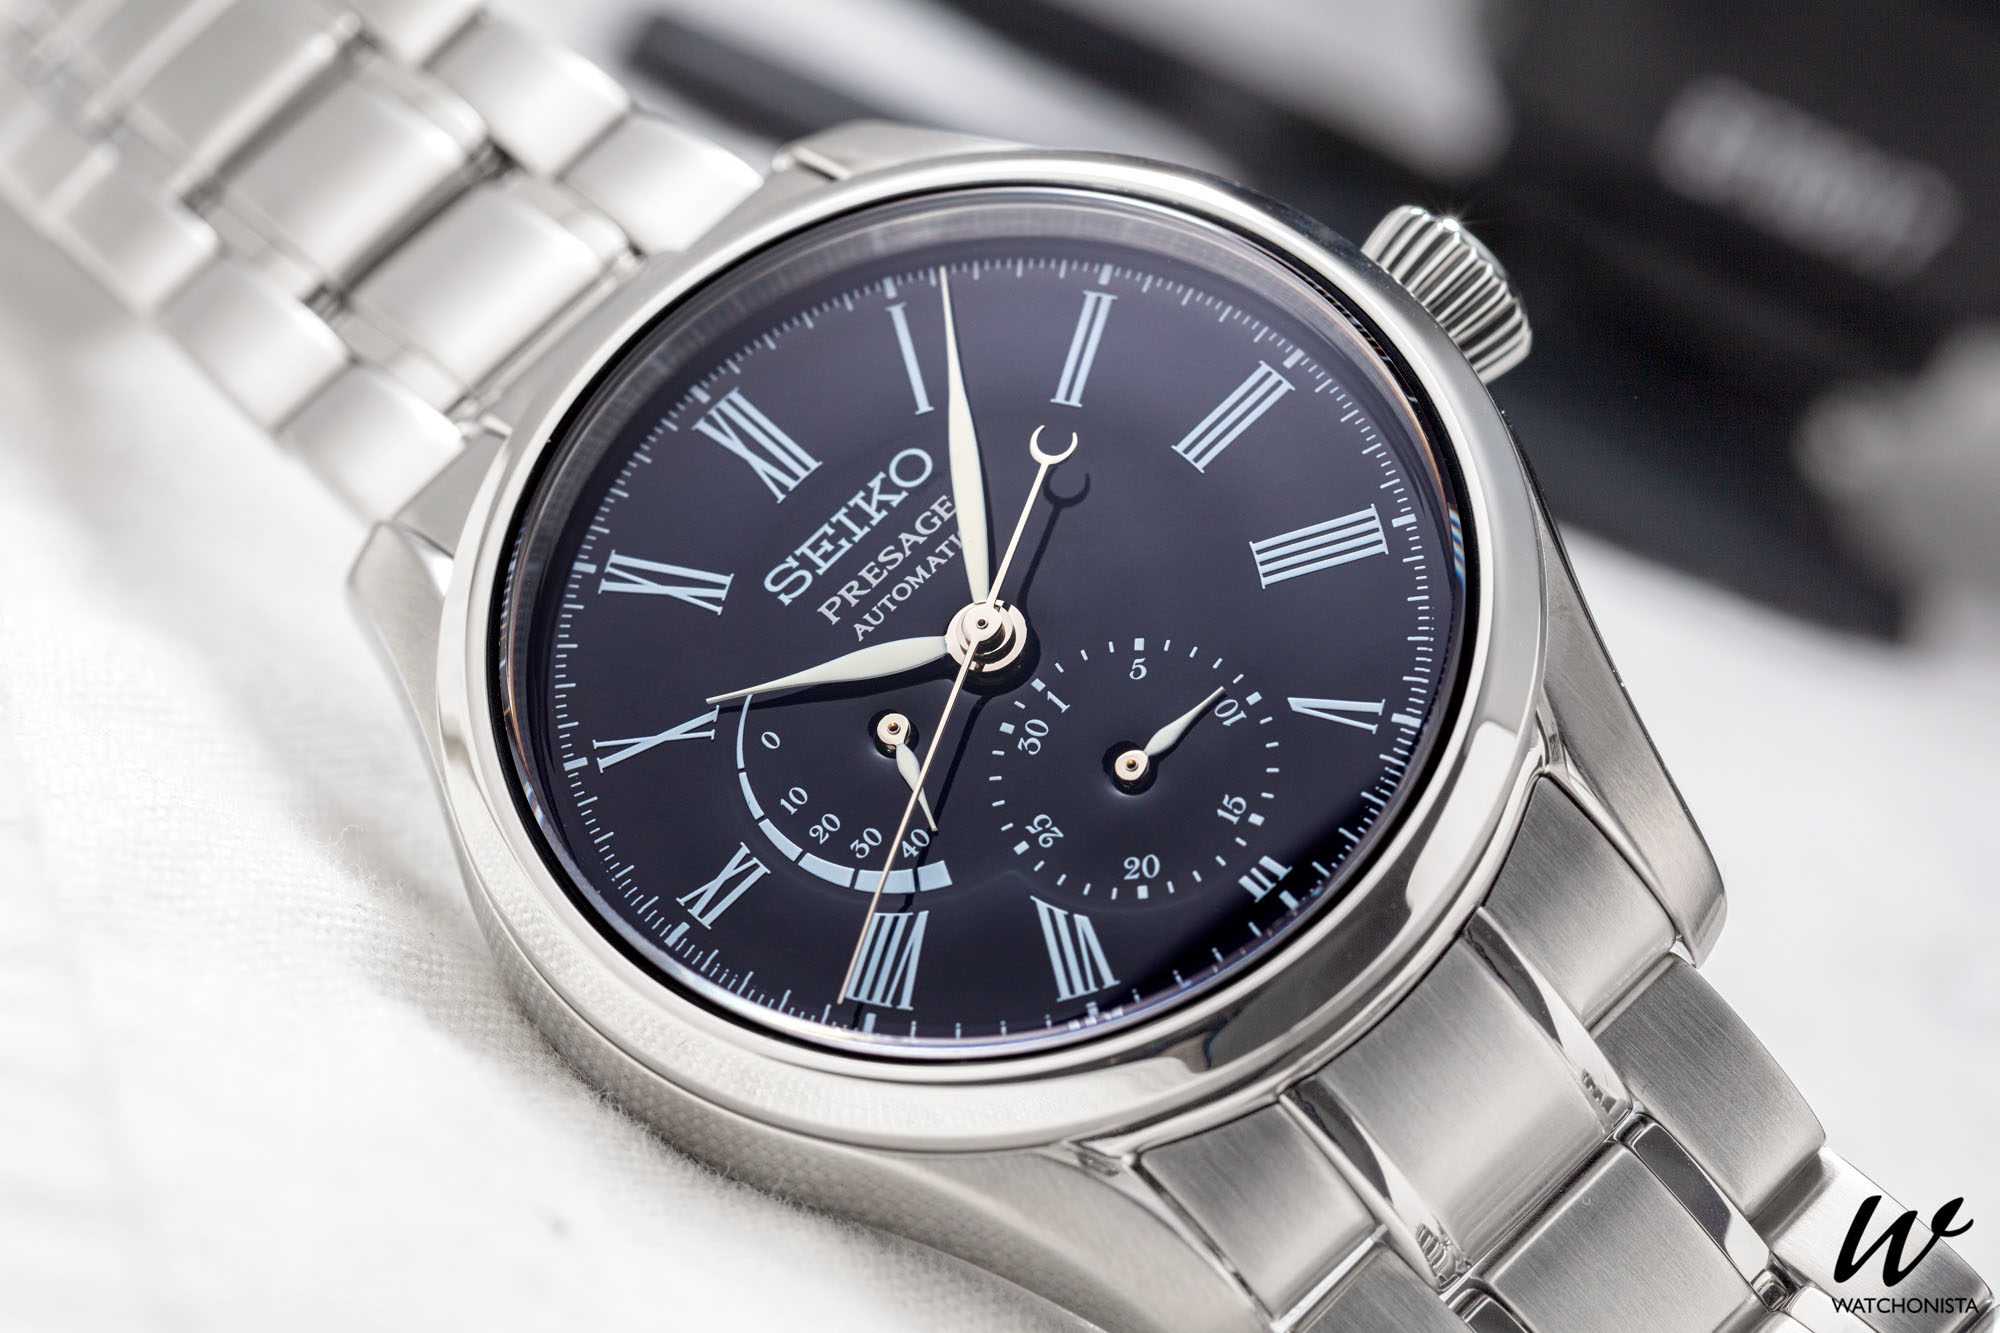 Dial It Up: Seiko's Presage Gives Good Face, Here Are Our Top Three ...